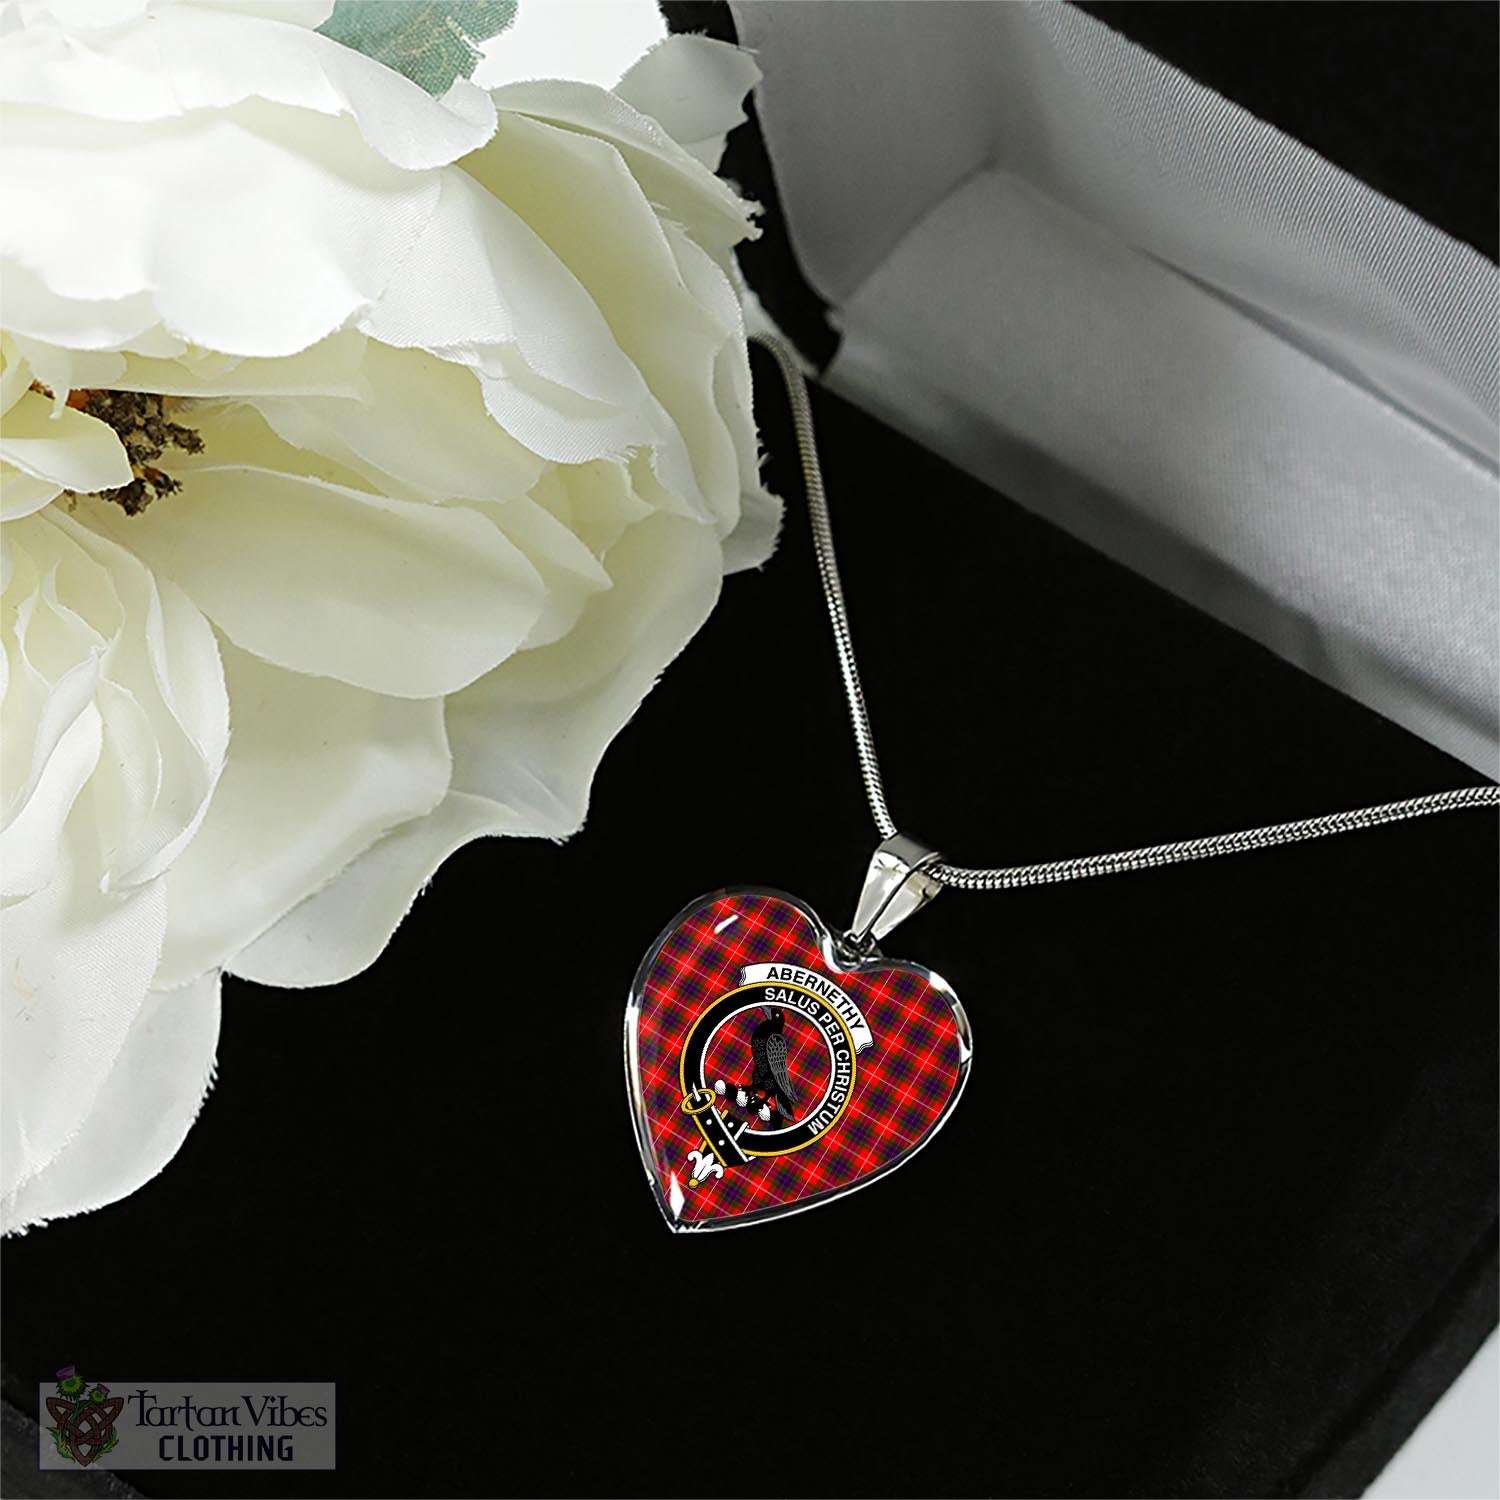 Tartan Vibes Clothing Abernethy Tartan Heart Necklace with Family Crest